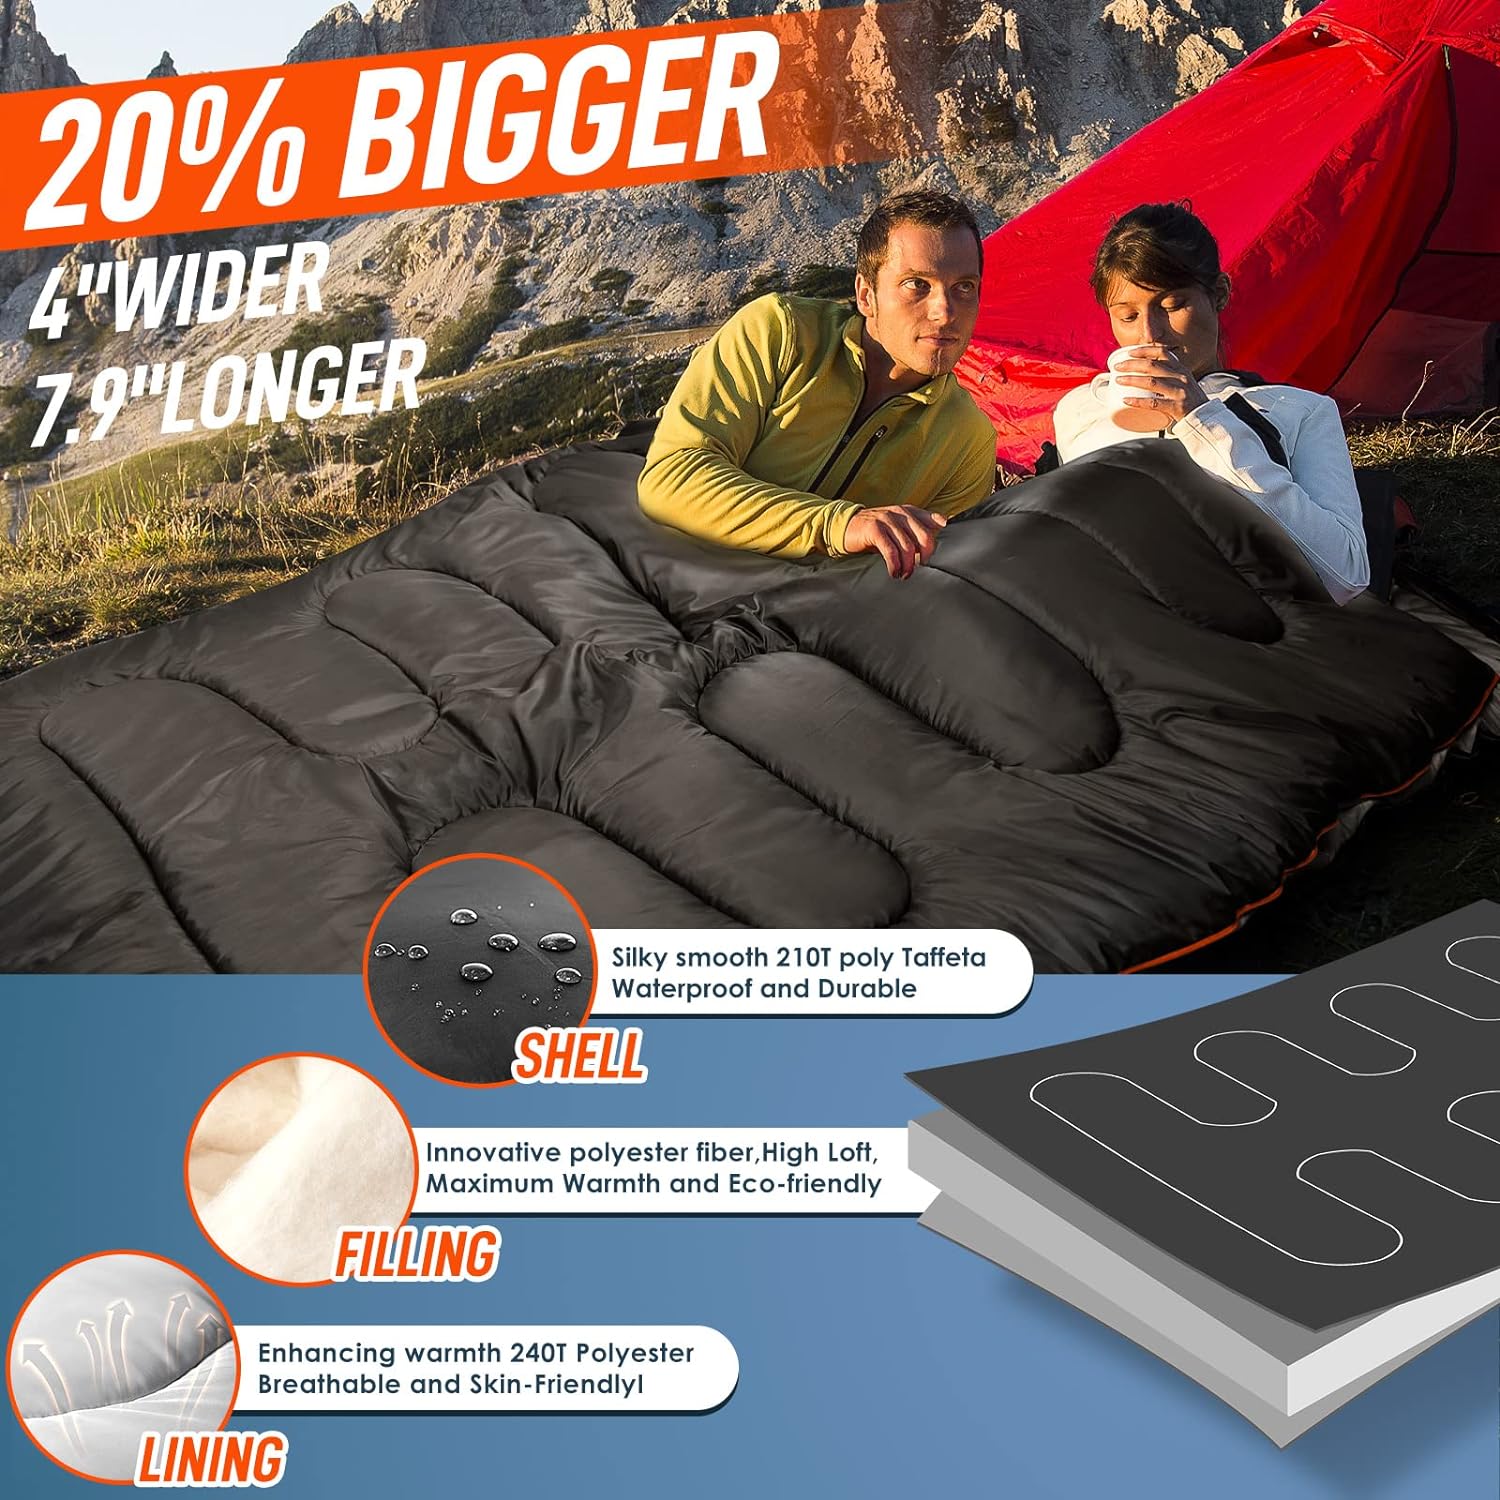 Double Sleeping Bag for Adults with Pillow, Two Person Sleeping Bag for All Season Camping, Backpacking, or Hiking for Adults or Teens Queen Size XL - Delicate Leather